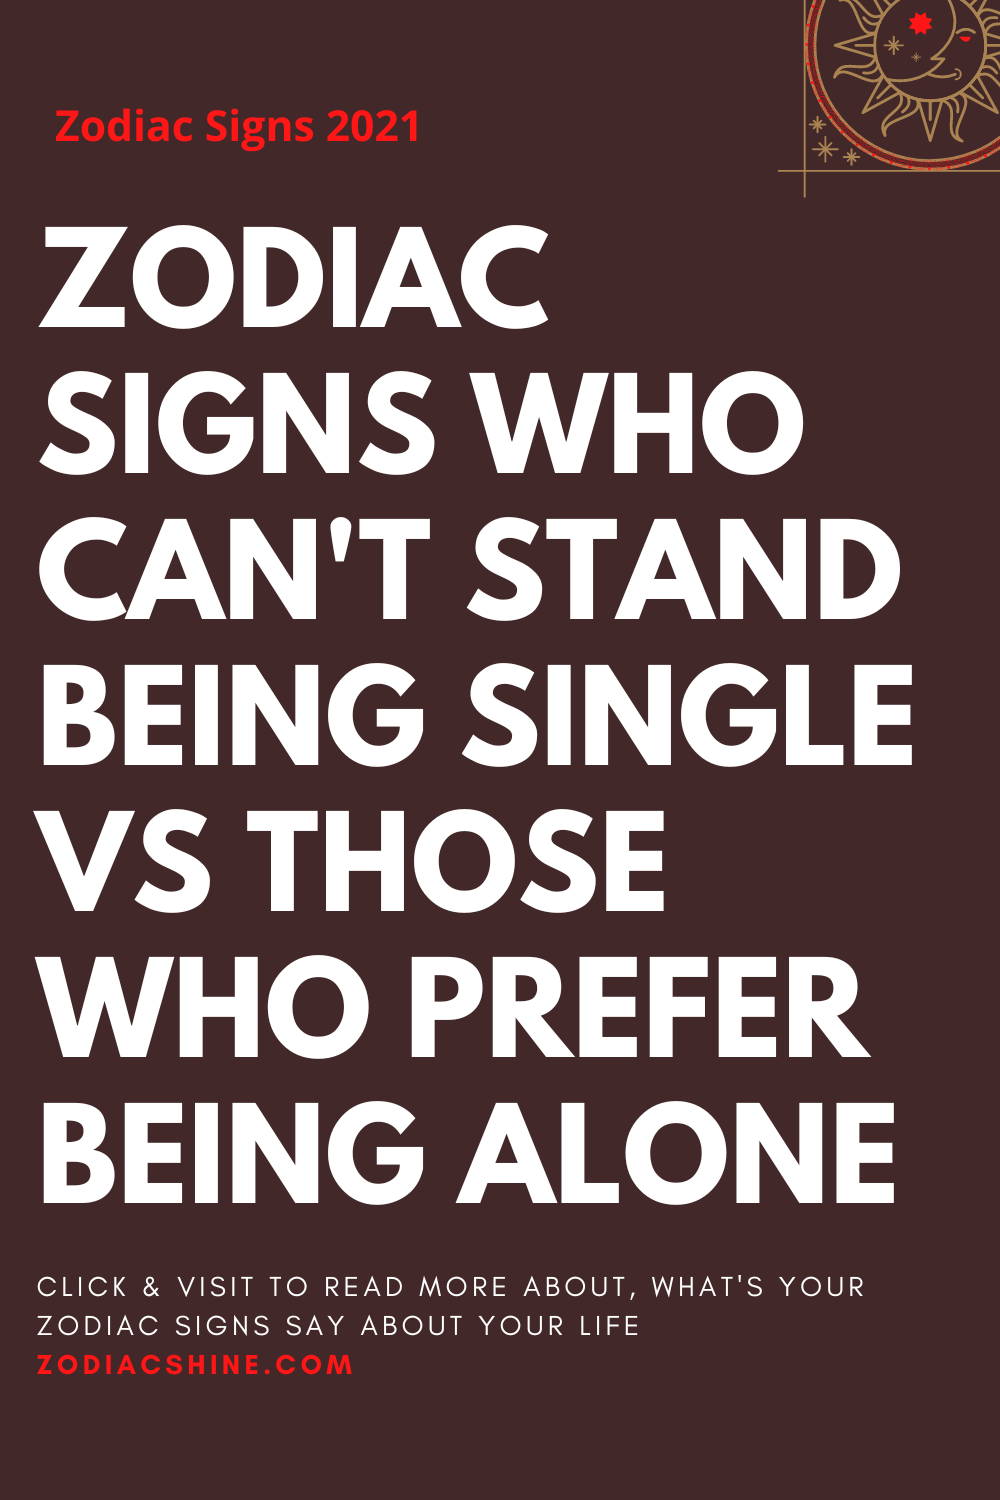 ZODIAC SIGNS WHO CAN'T STAND BEING SINGLE VS THOSE WHO PREFER BEING ALONE